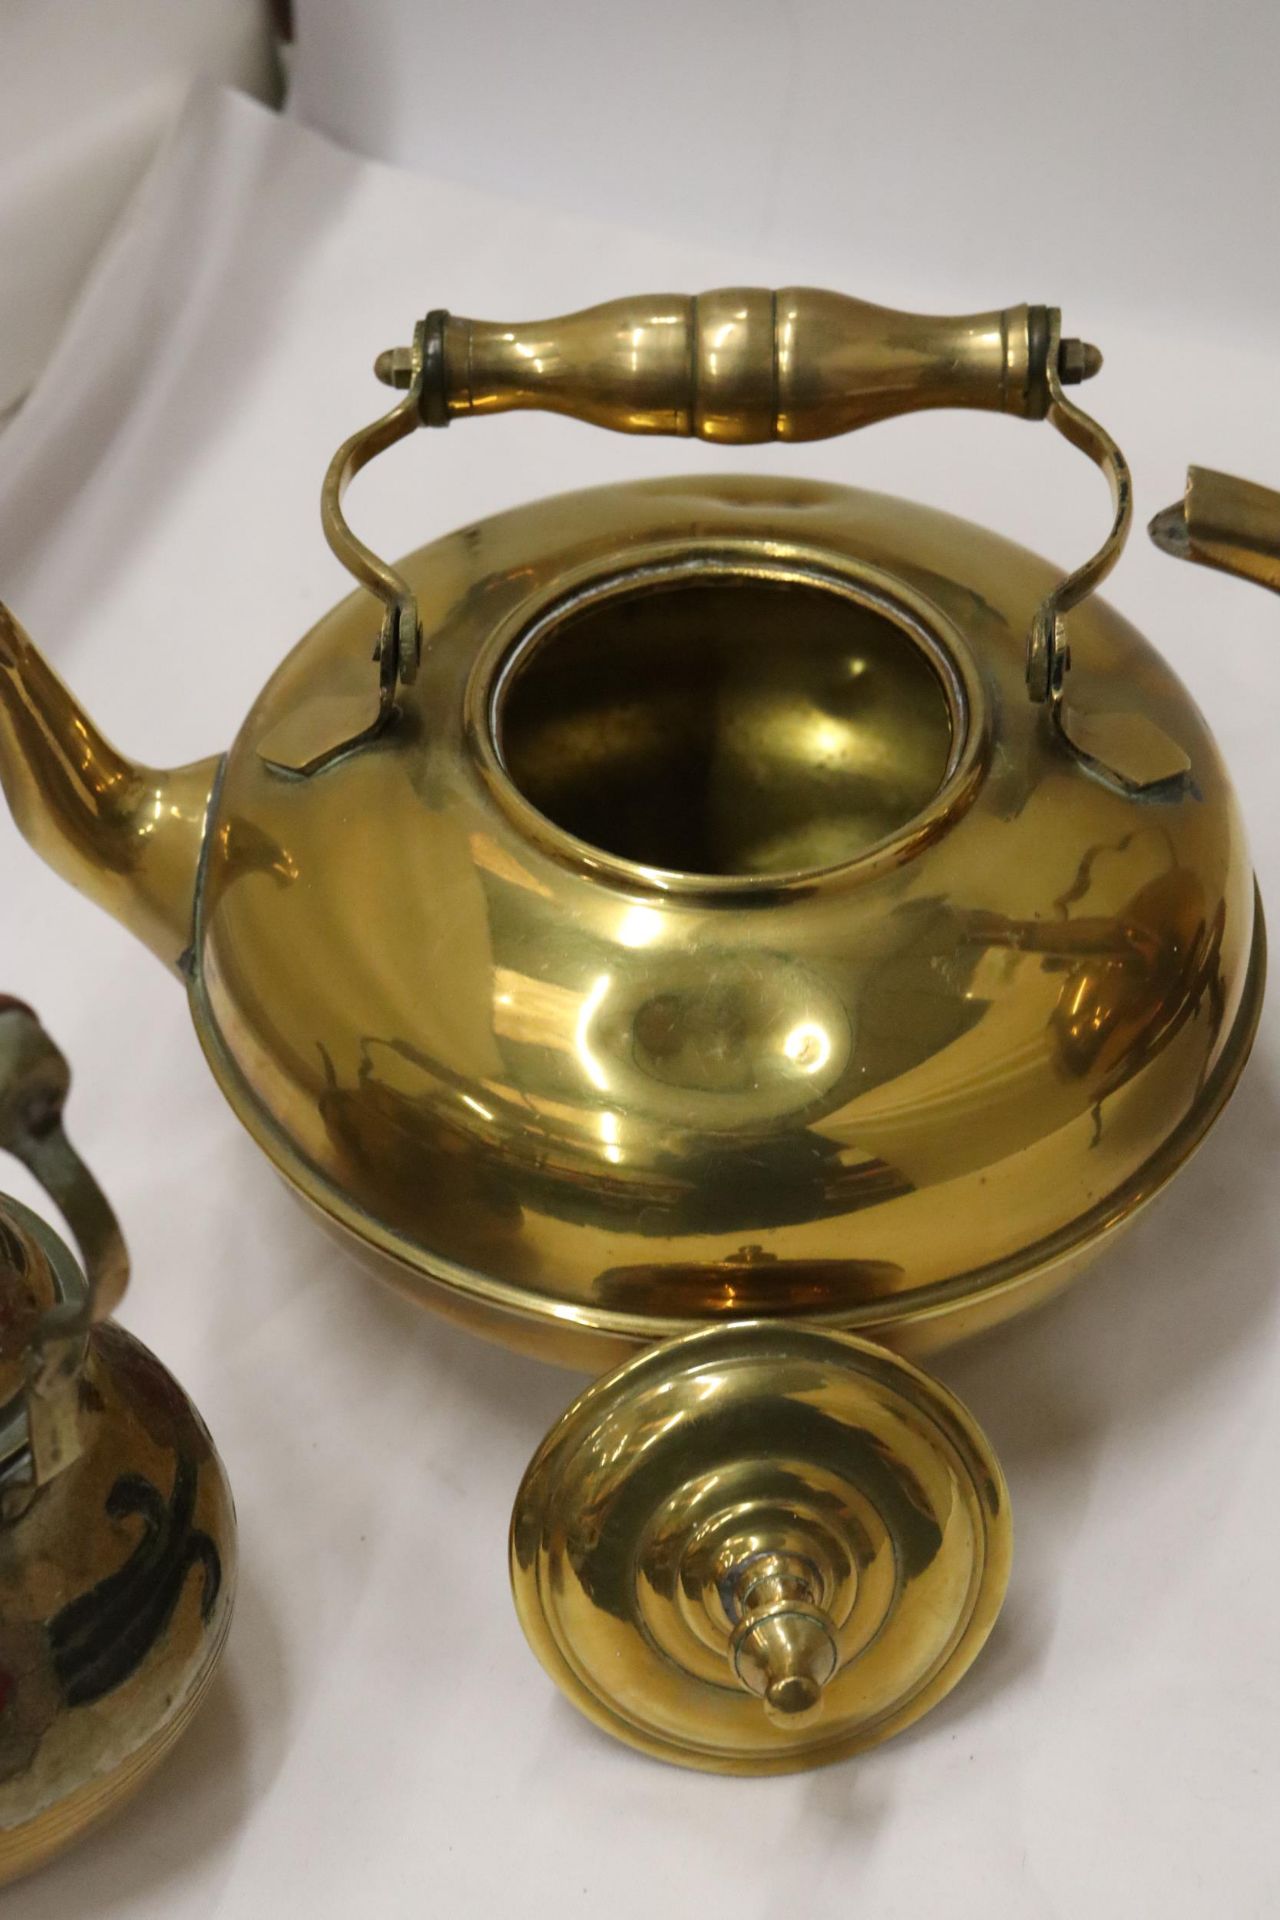 TWO BRASS KETTLES, A CLOISONNE KETTLE AND A TRIVET - Image 7 of 8